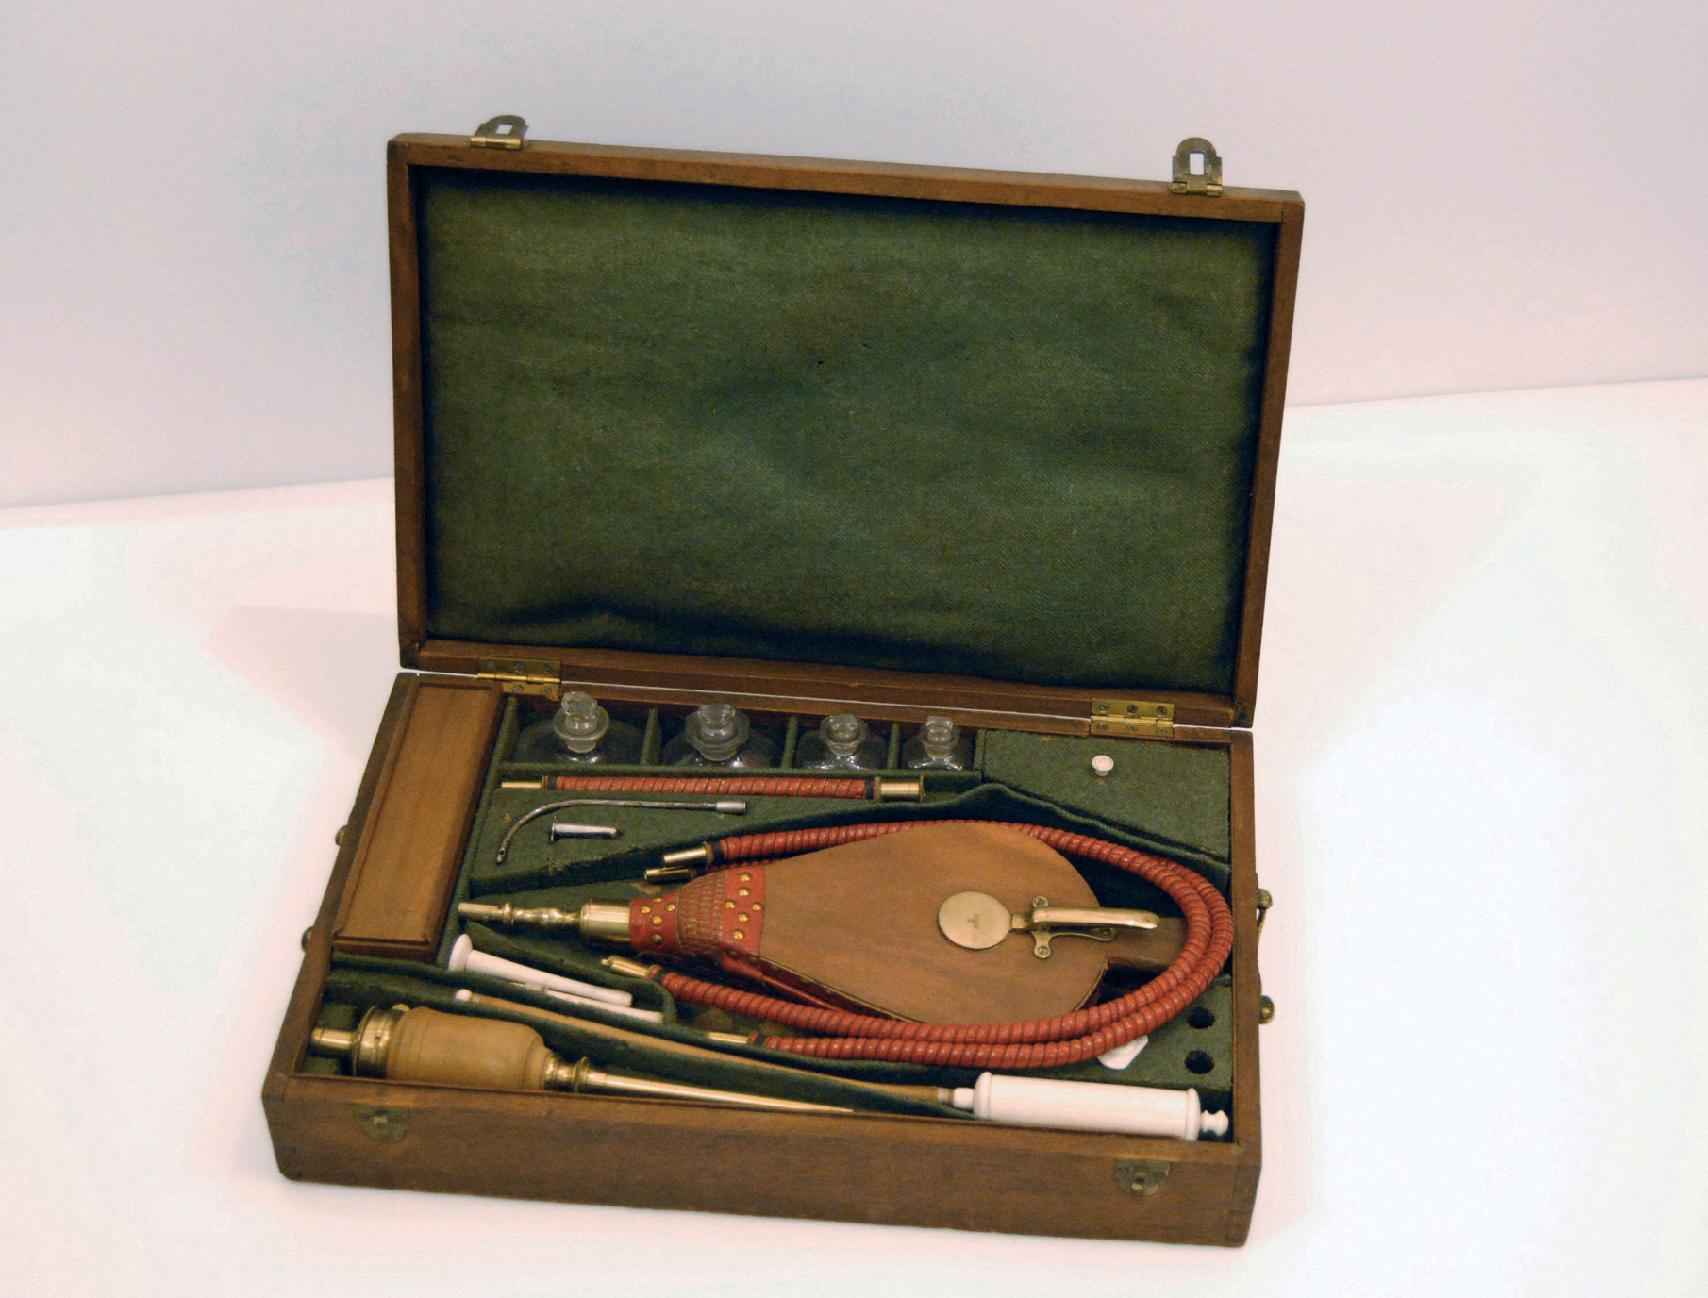 Fig. 17.2, Resuscitation set of Royal Humane Society on permanent loan to Association of Anaesthetists, London, showing curved metal tube for blind laryngeal intubation. (Photograph reproduced with the kind permission of The Association of Anaesthetists.)